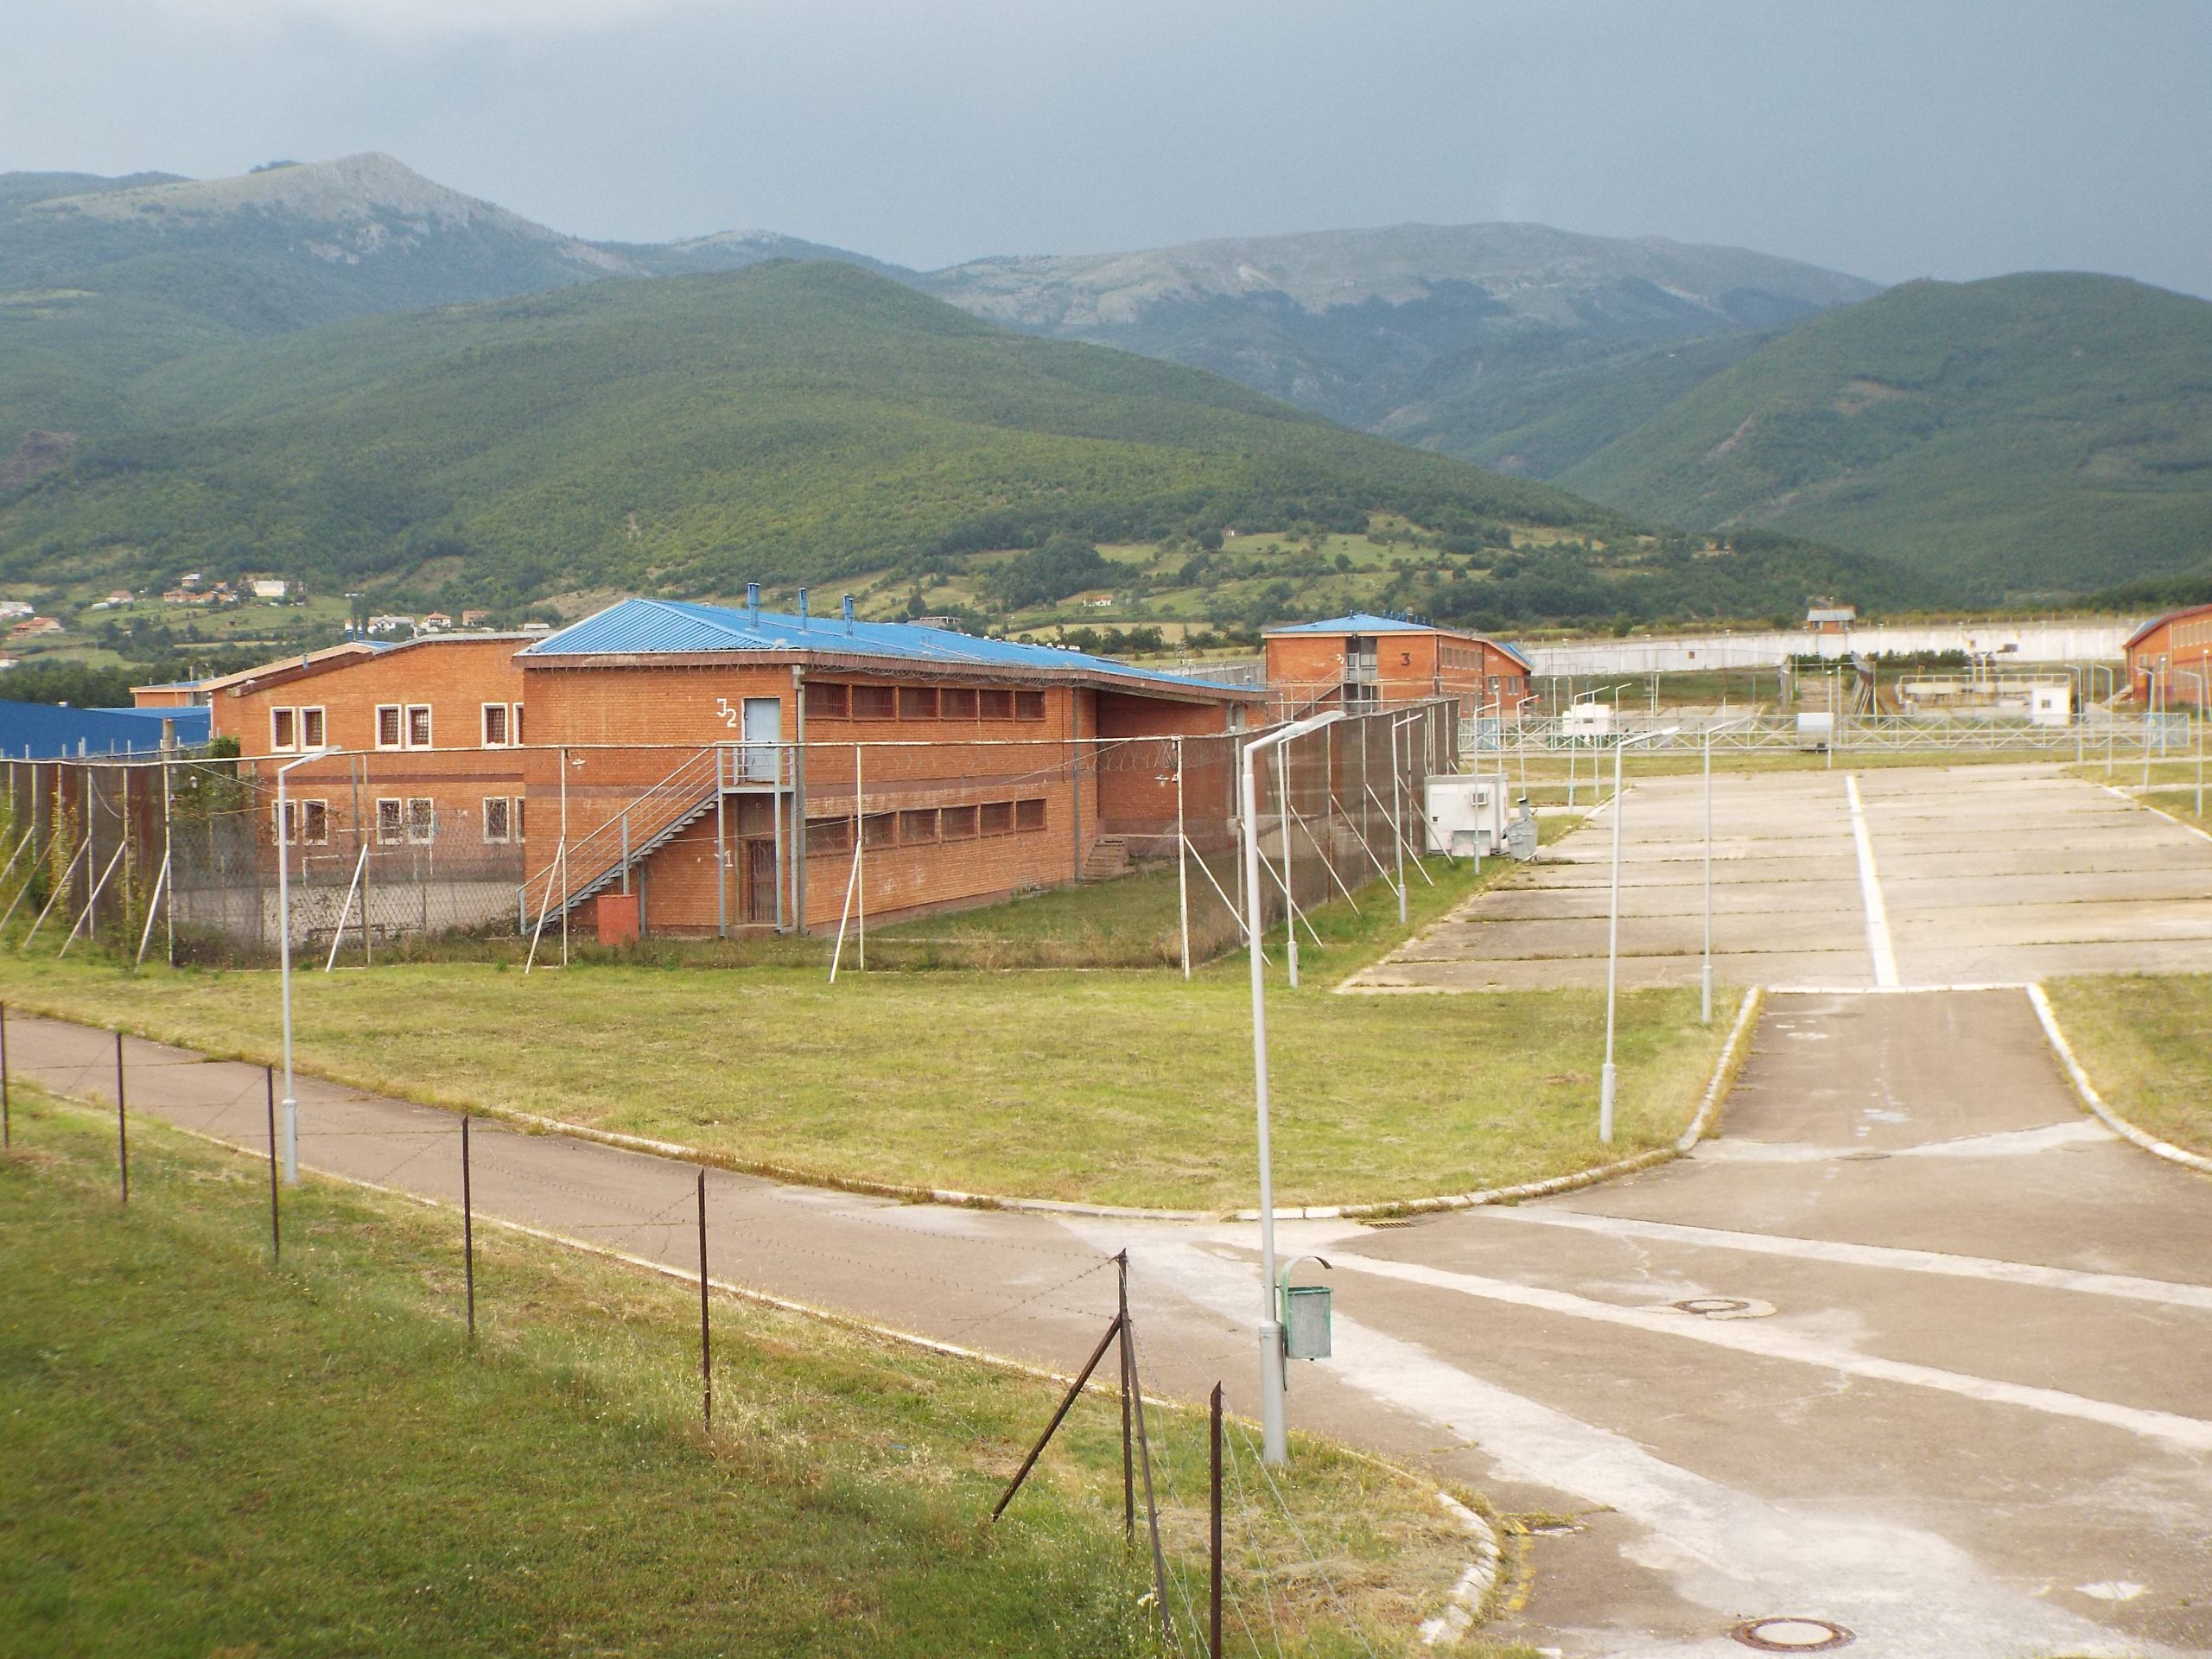 Massacre in Kosovo Prison Was Planned by Serbia, Witness Says